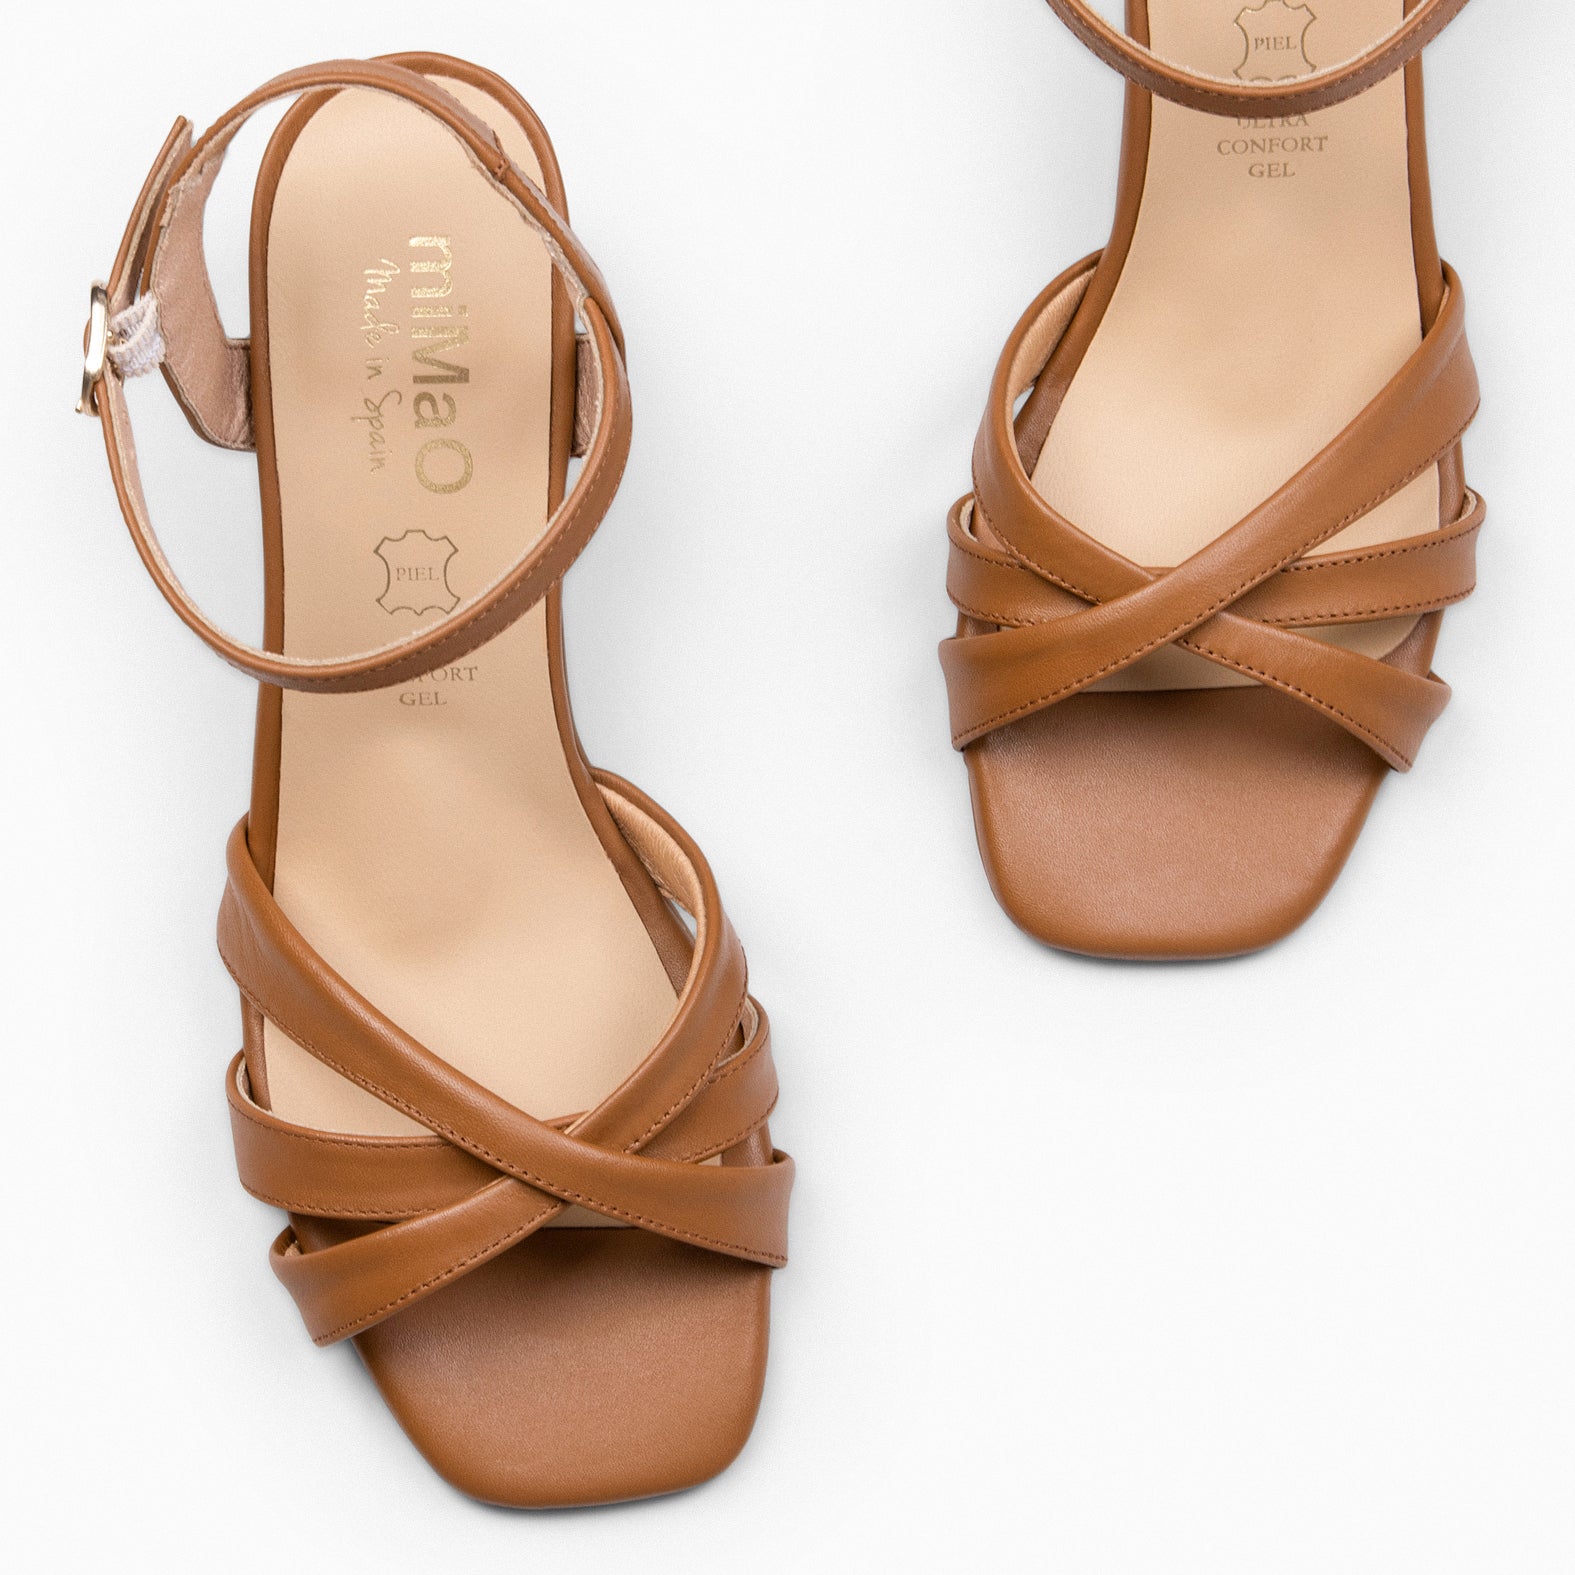 PAULA - LEATHER Party Heel Sandals